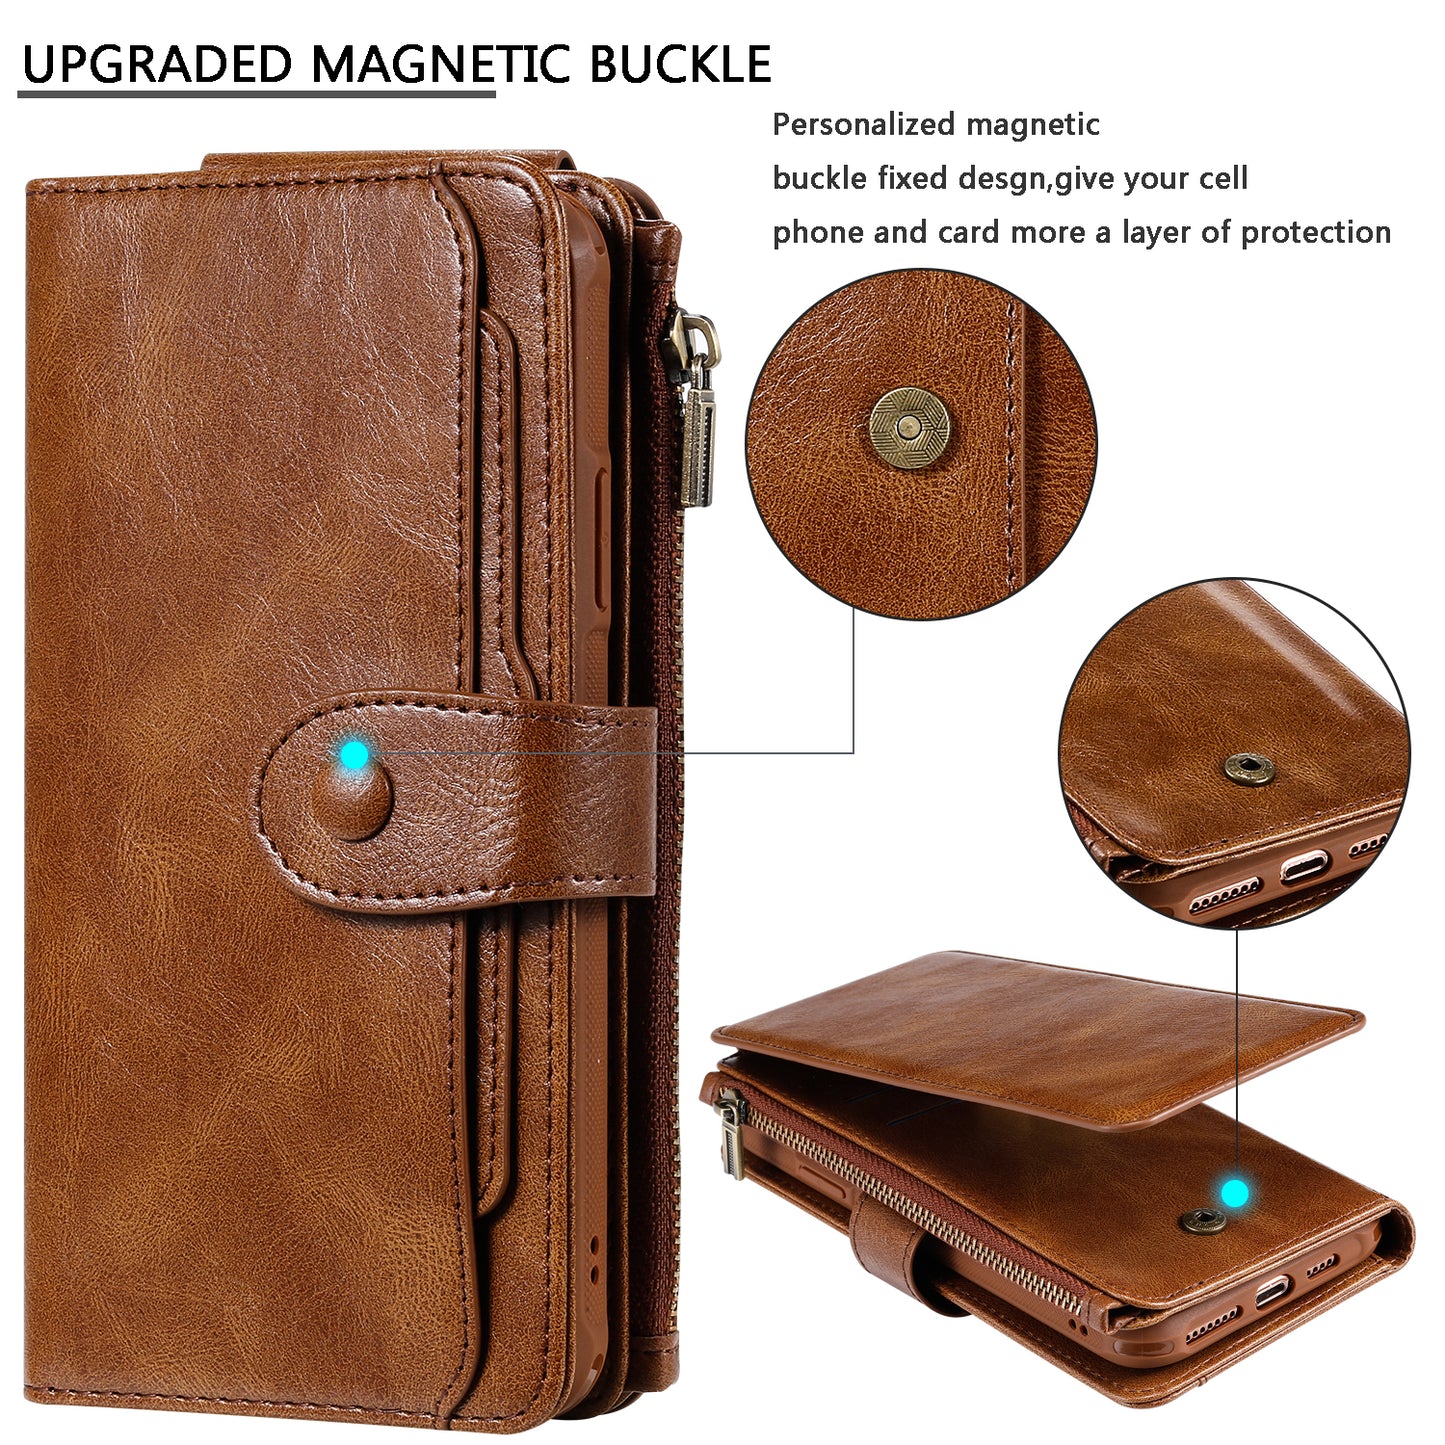 Customizable Genuine Leather iPhone Flip Case Wallet with Magnetic Back Cover for iPhone 12/ iPhone 11/ iPhone XS/ iPhone 8/ iPhone 7